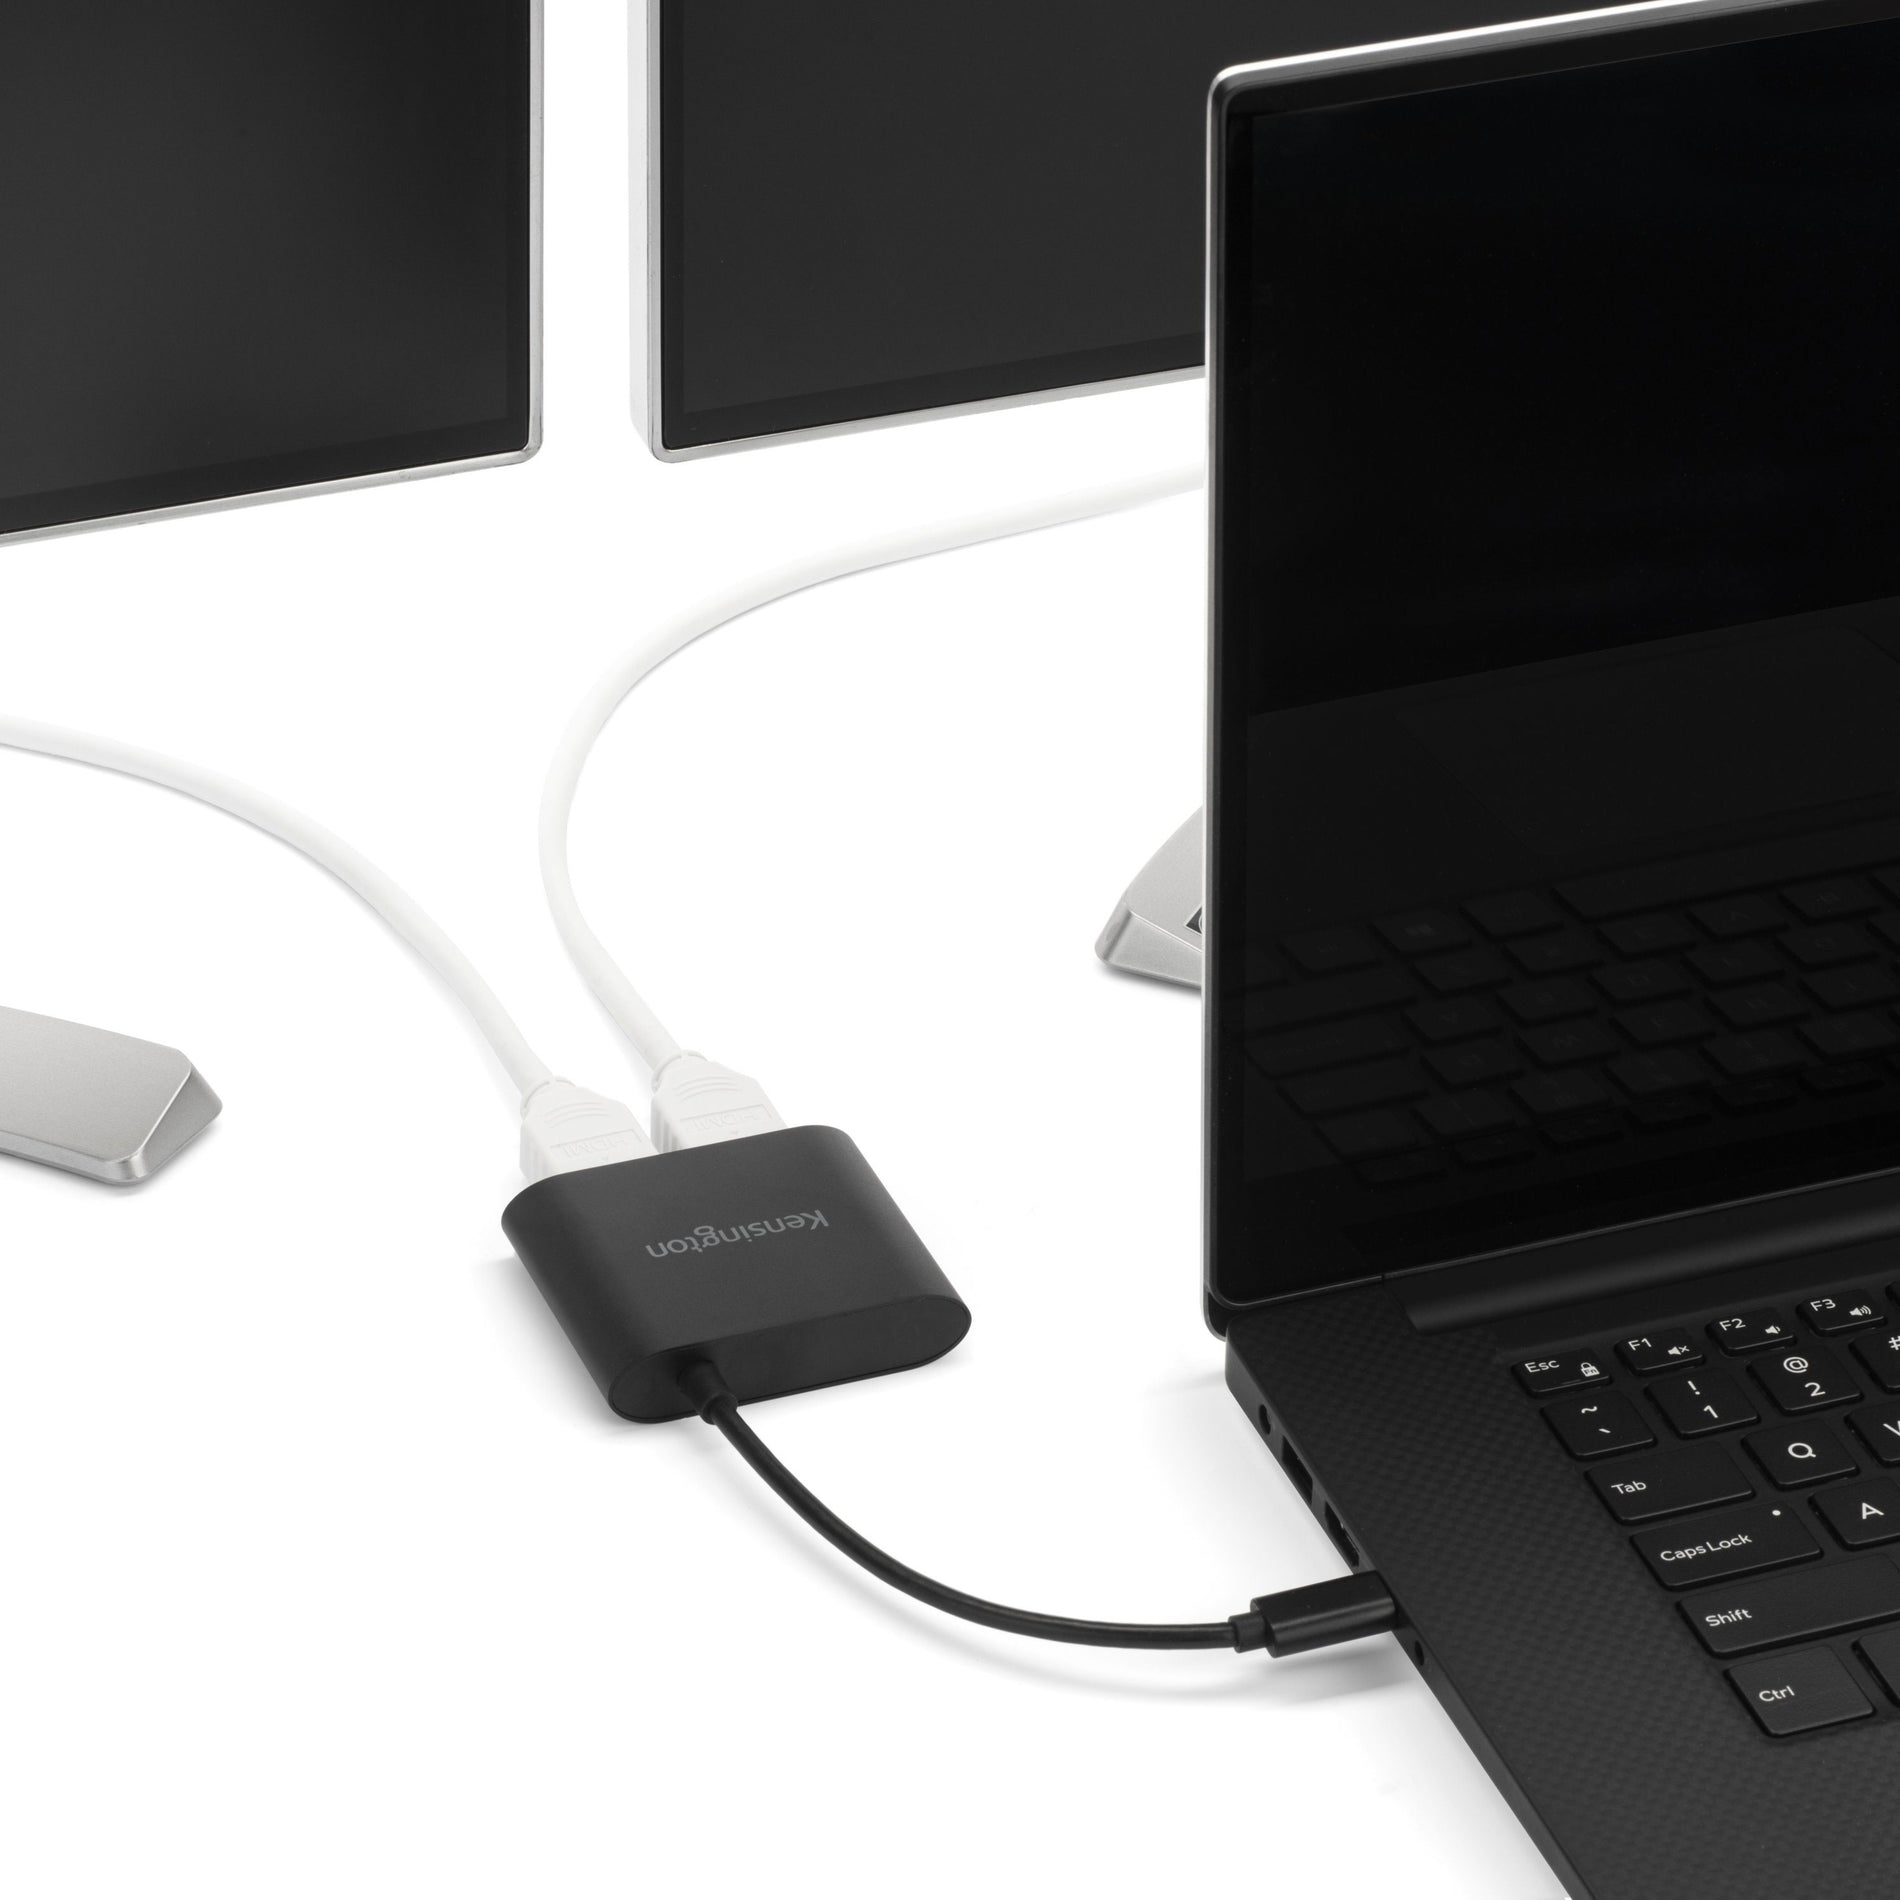 Kensington K38286WW USB-C to Dual HDMI 1.4 Video Adapter, Plug and Play, 3840 x 2160 Resolution Supported